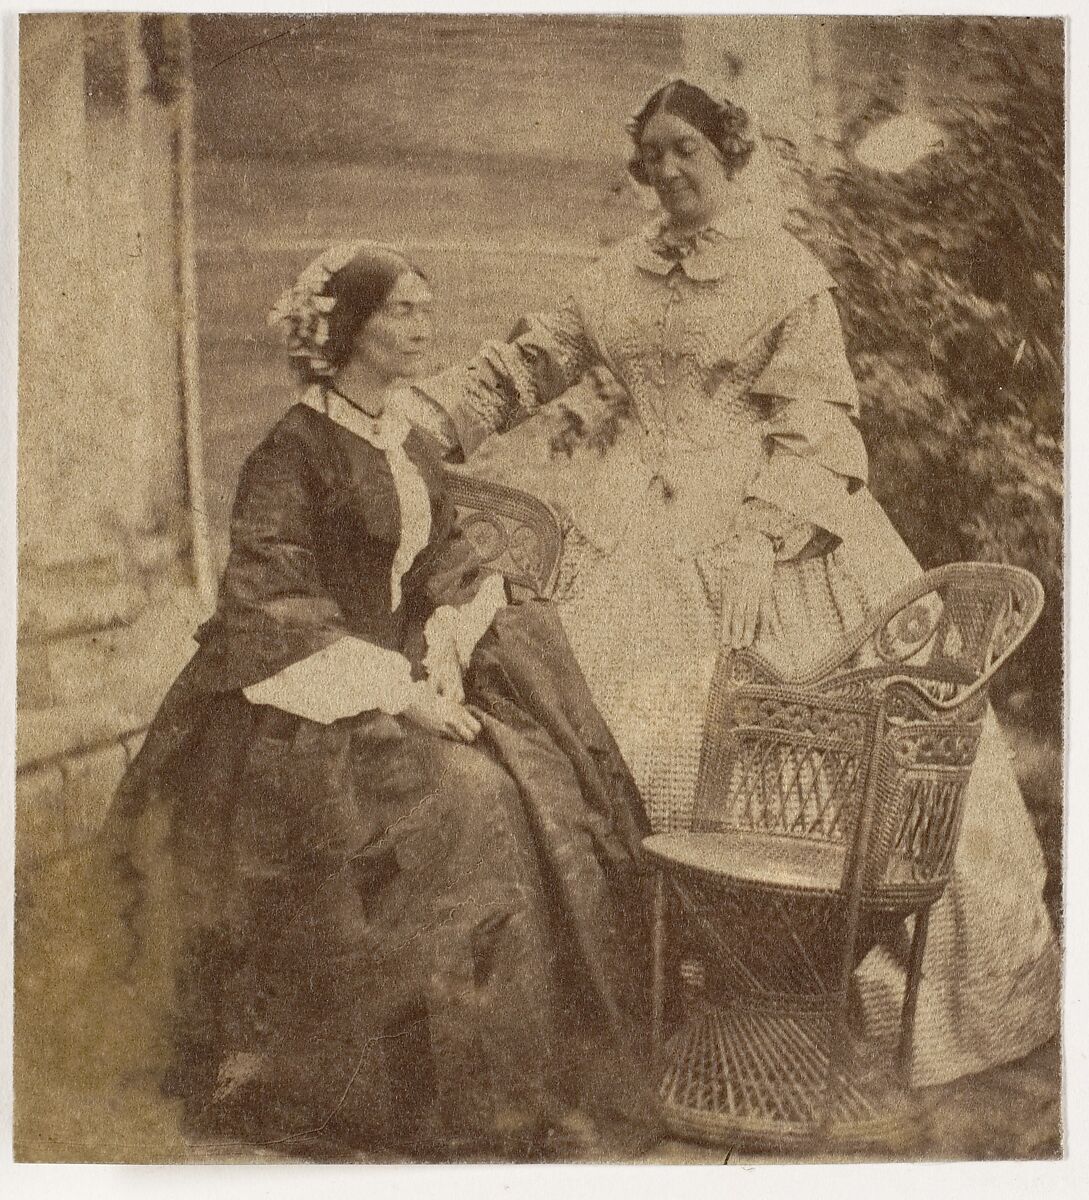 [Countess Canning with Guest, Government House, Allahabad], John Constantine Stanley (British, 1837–1878), Albumen silver print 